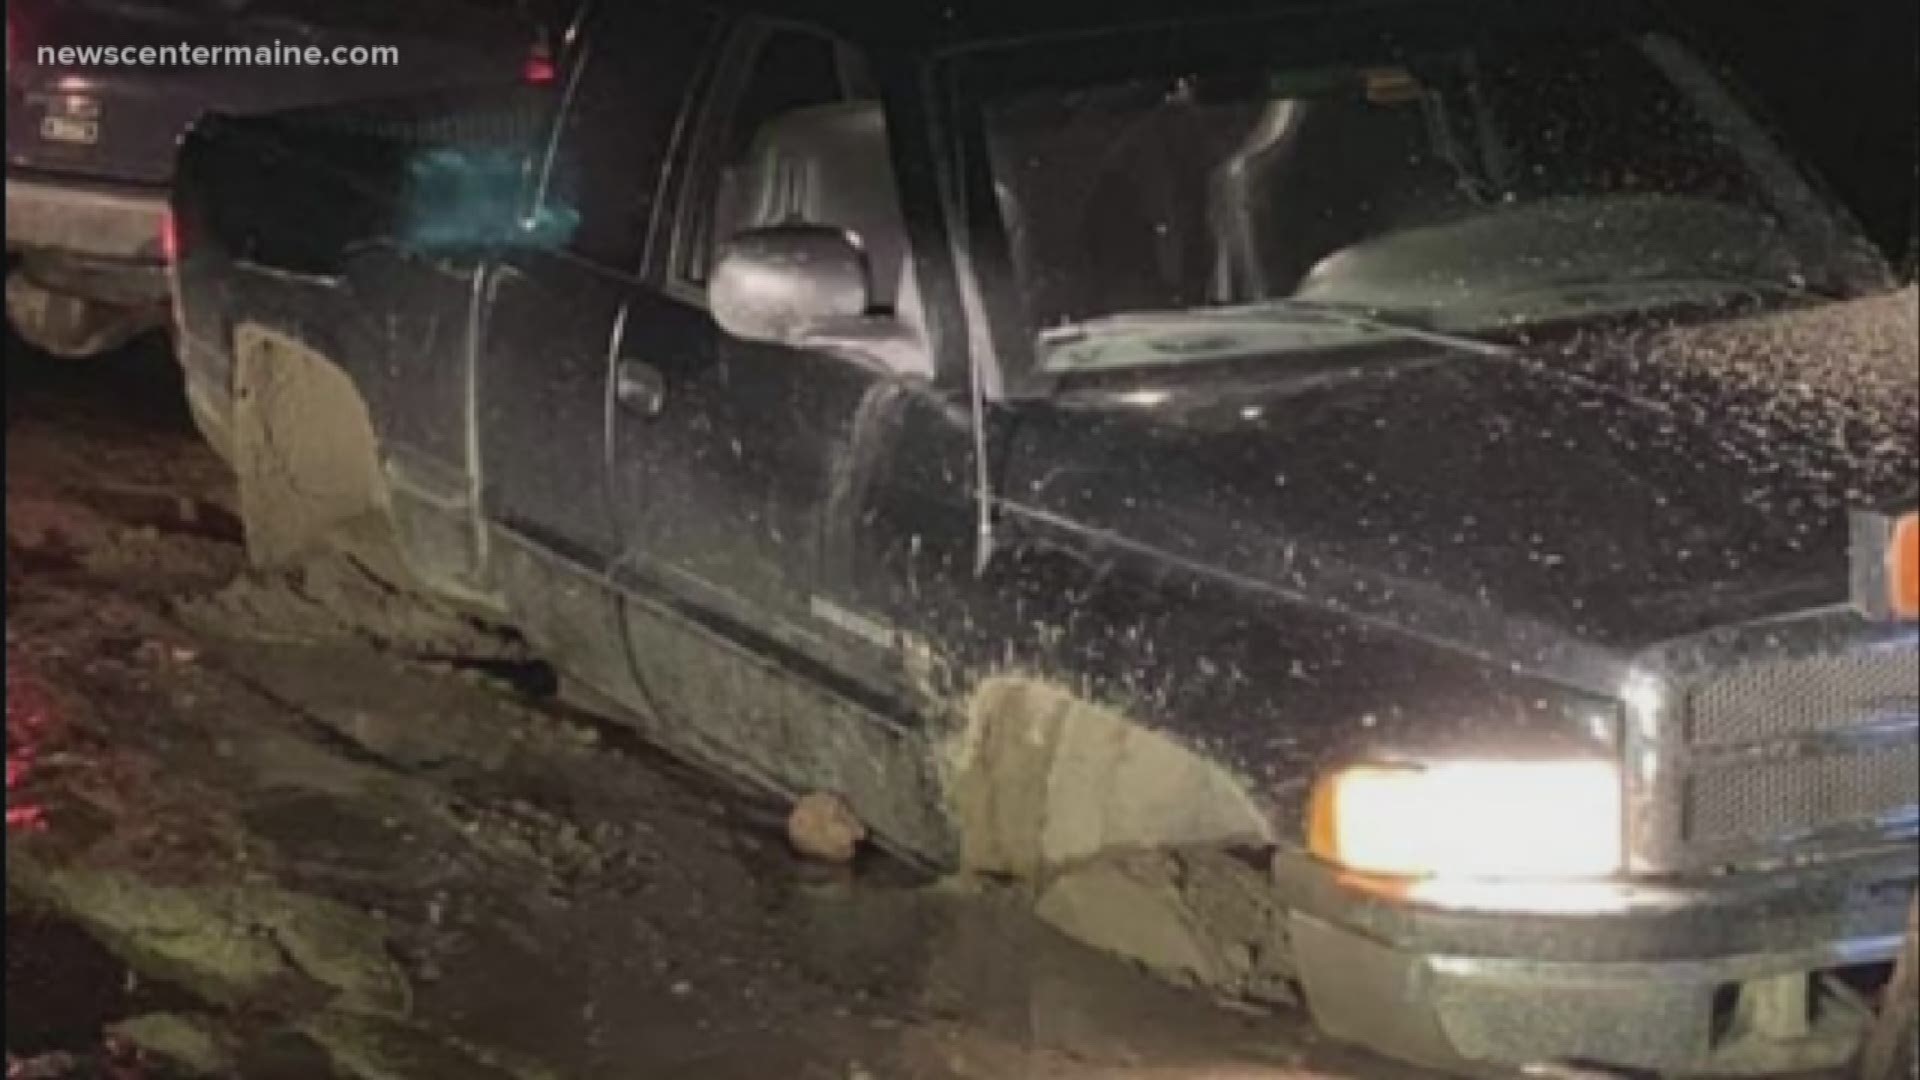 Mud season in Maine has turned some roads into tricky sinkholes for people and their cars.